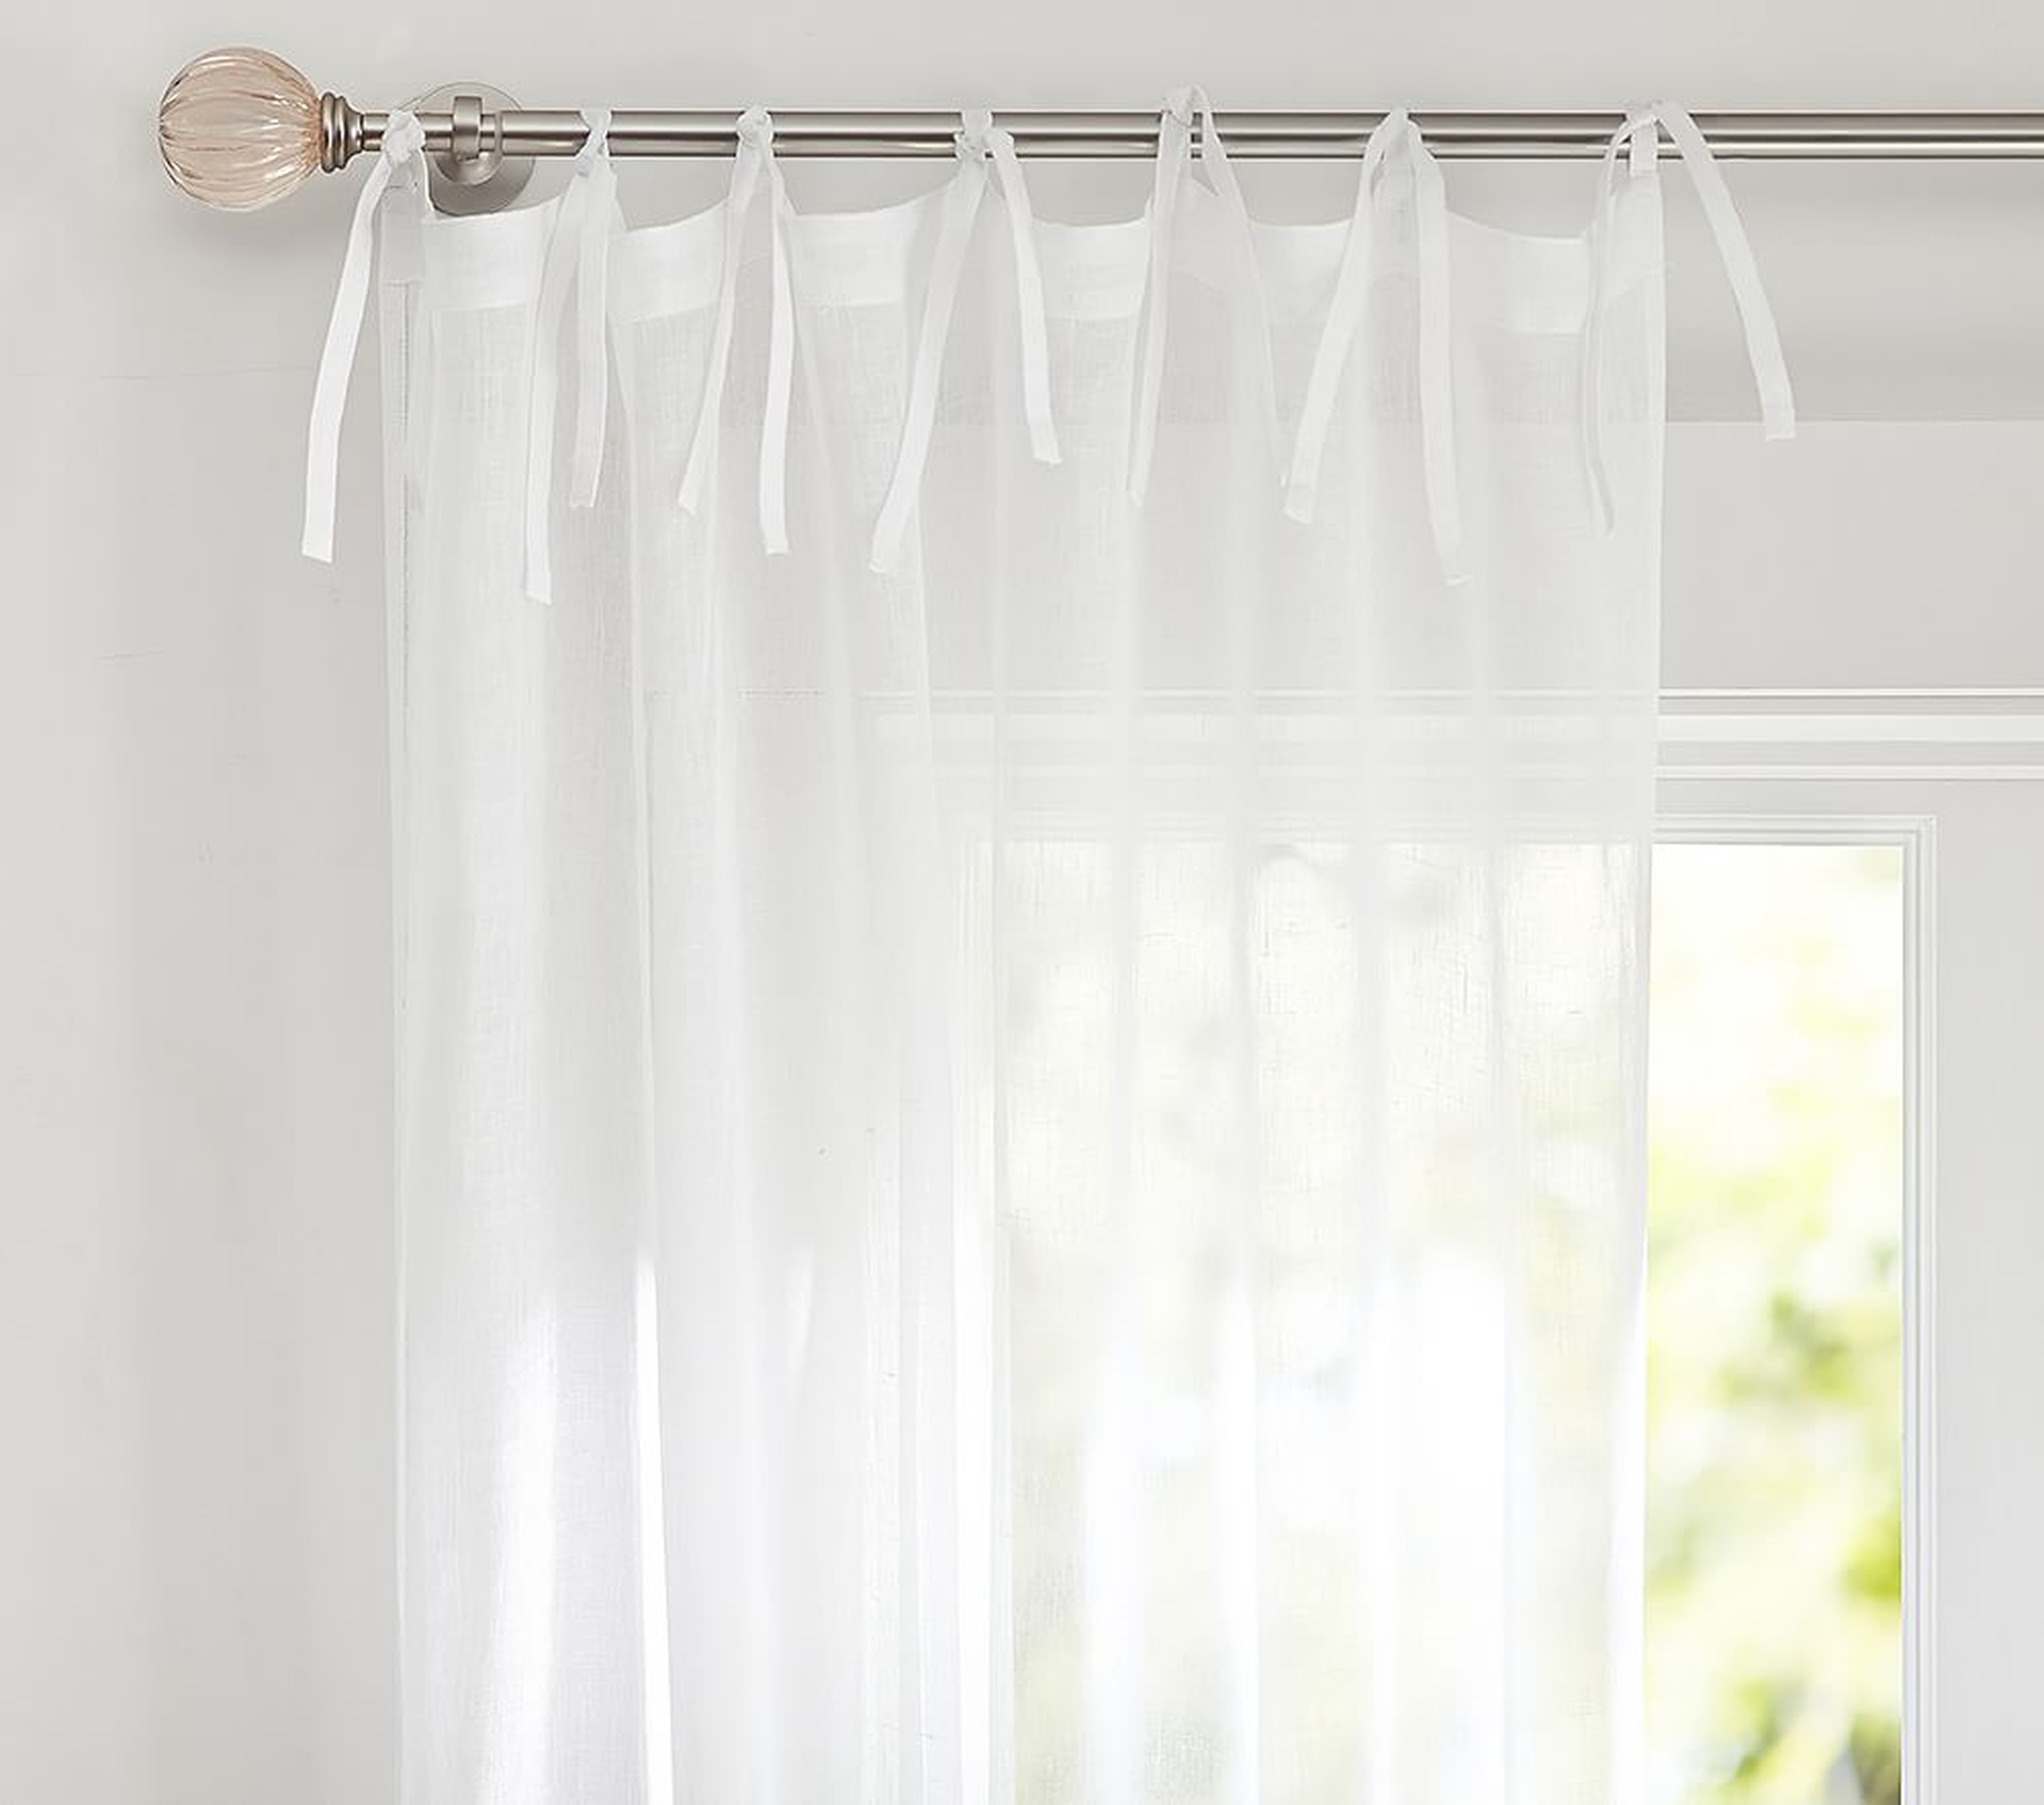 Linen Sheer Curtain Panel, 84 Inches, White, Set of 2 - Pottery Barn Kids